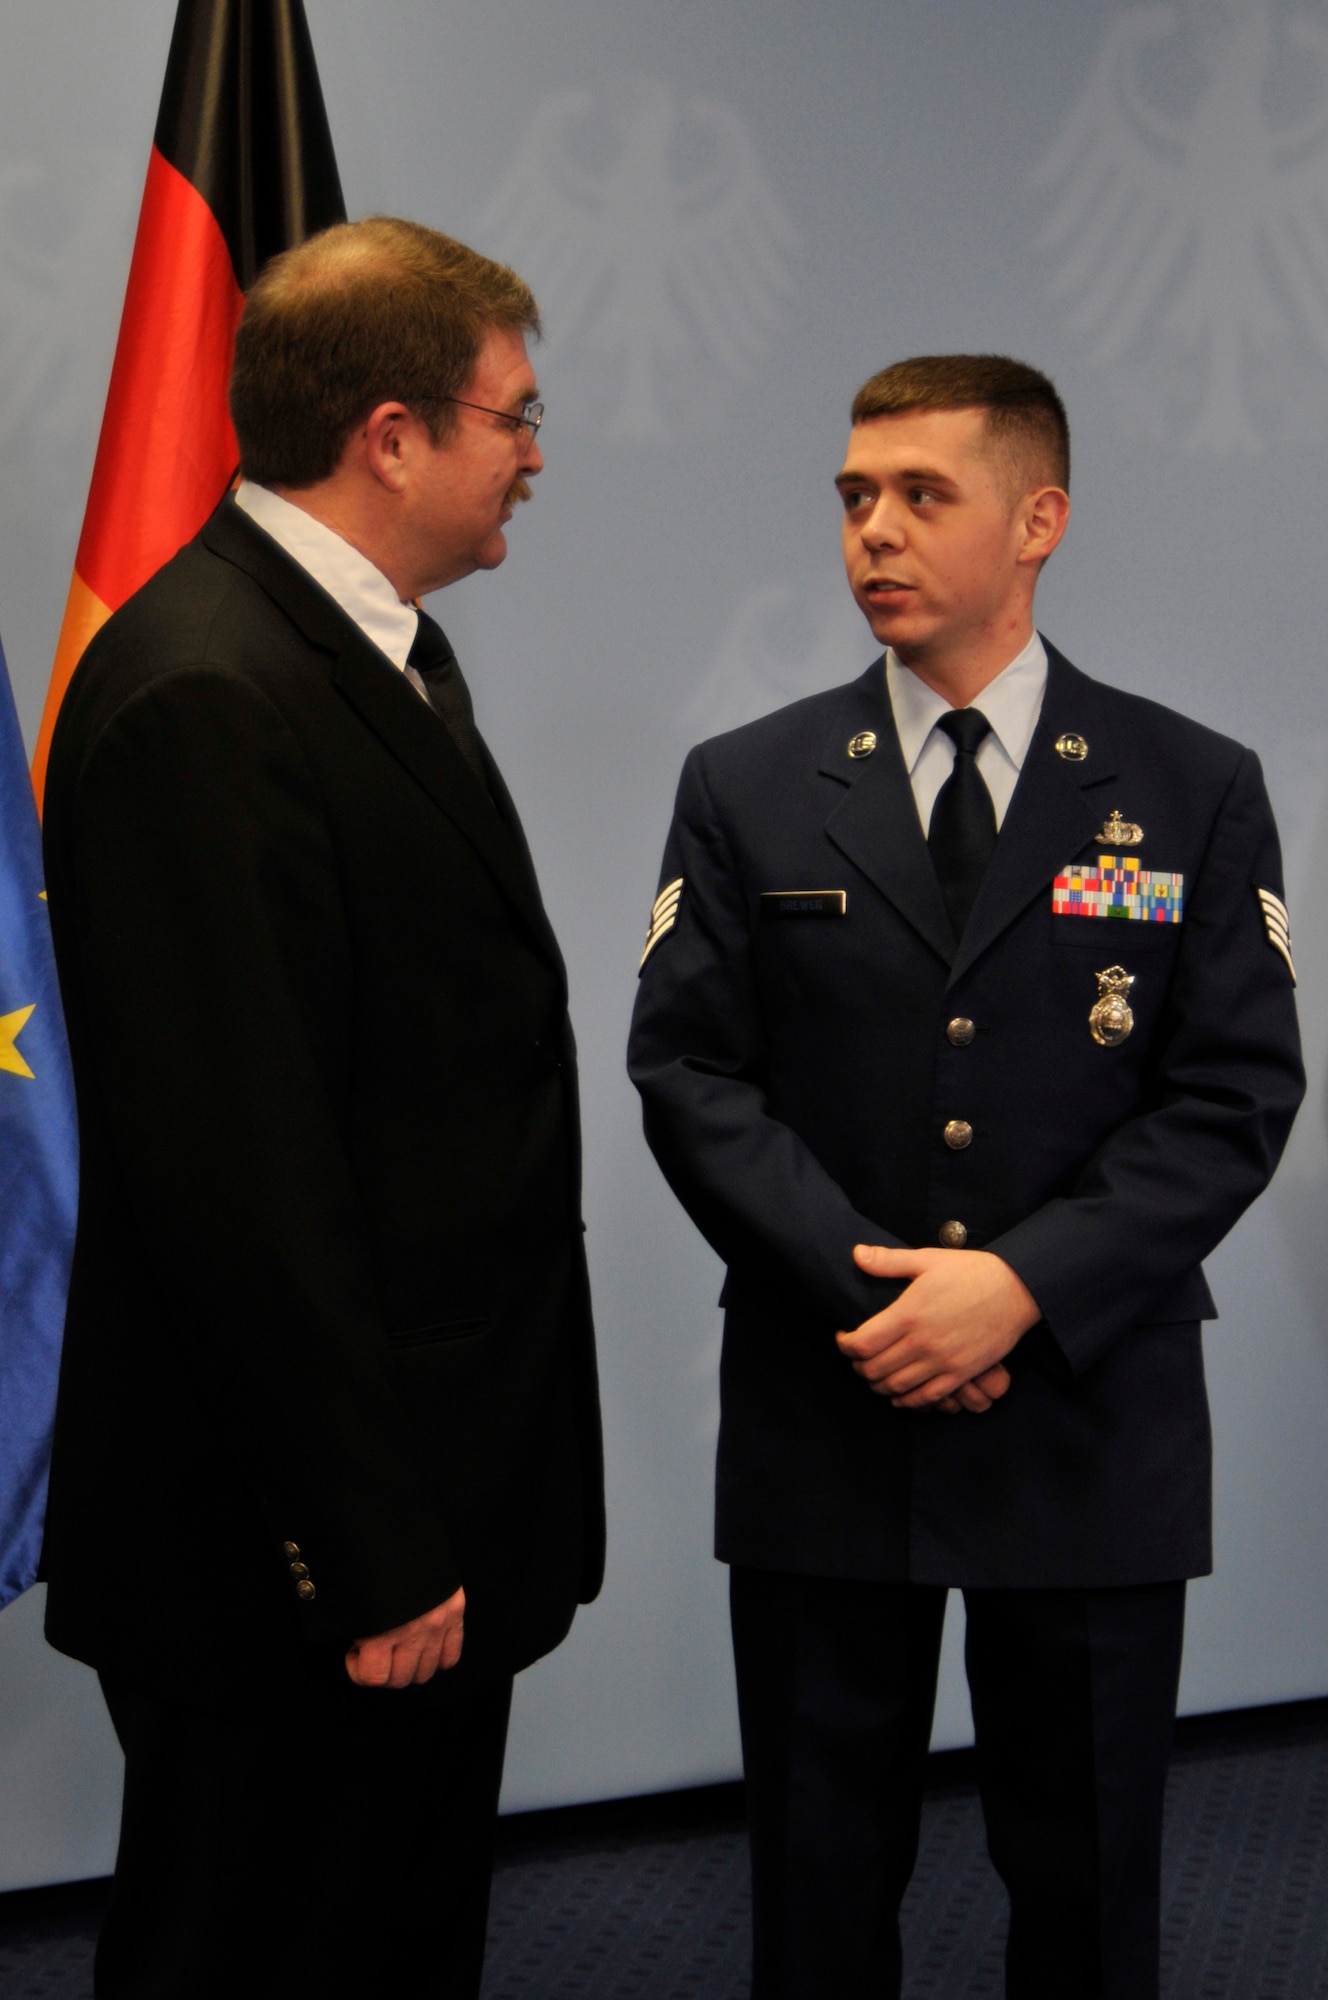 BERLIN -- Staff Sgt. Trevor Brewer, 48th Security Forces NCO in charge of vehicles, speaks with Joseph Connor at the German Ministry of the Interior Jan. 16, 2012. Both gentlemen received the Order of Merit of the Federal Republic of Germany for their actions during the March 2, 2011, shootings at Frankfurt International Airport. (U.S. Air Force photo by Staff Sgt. David Dobrydney)